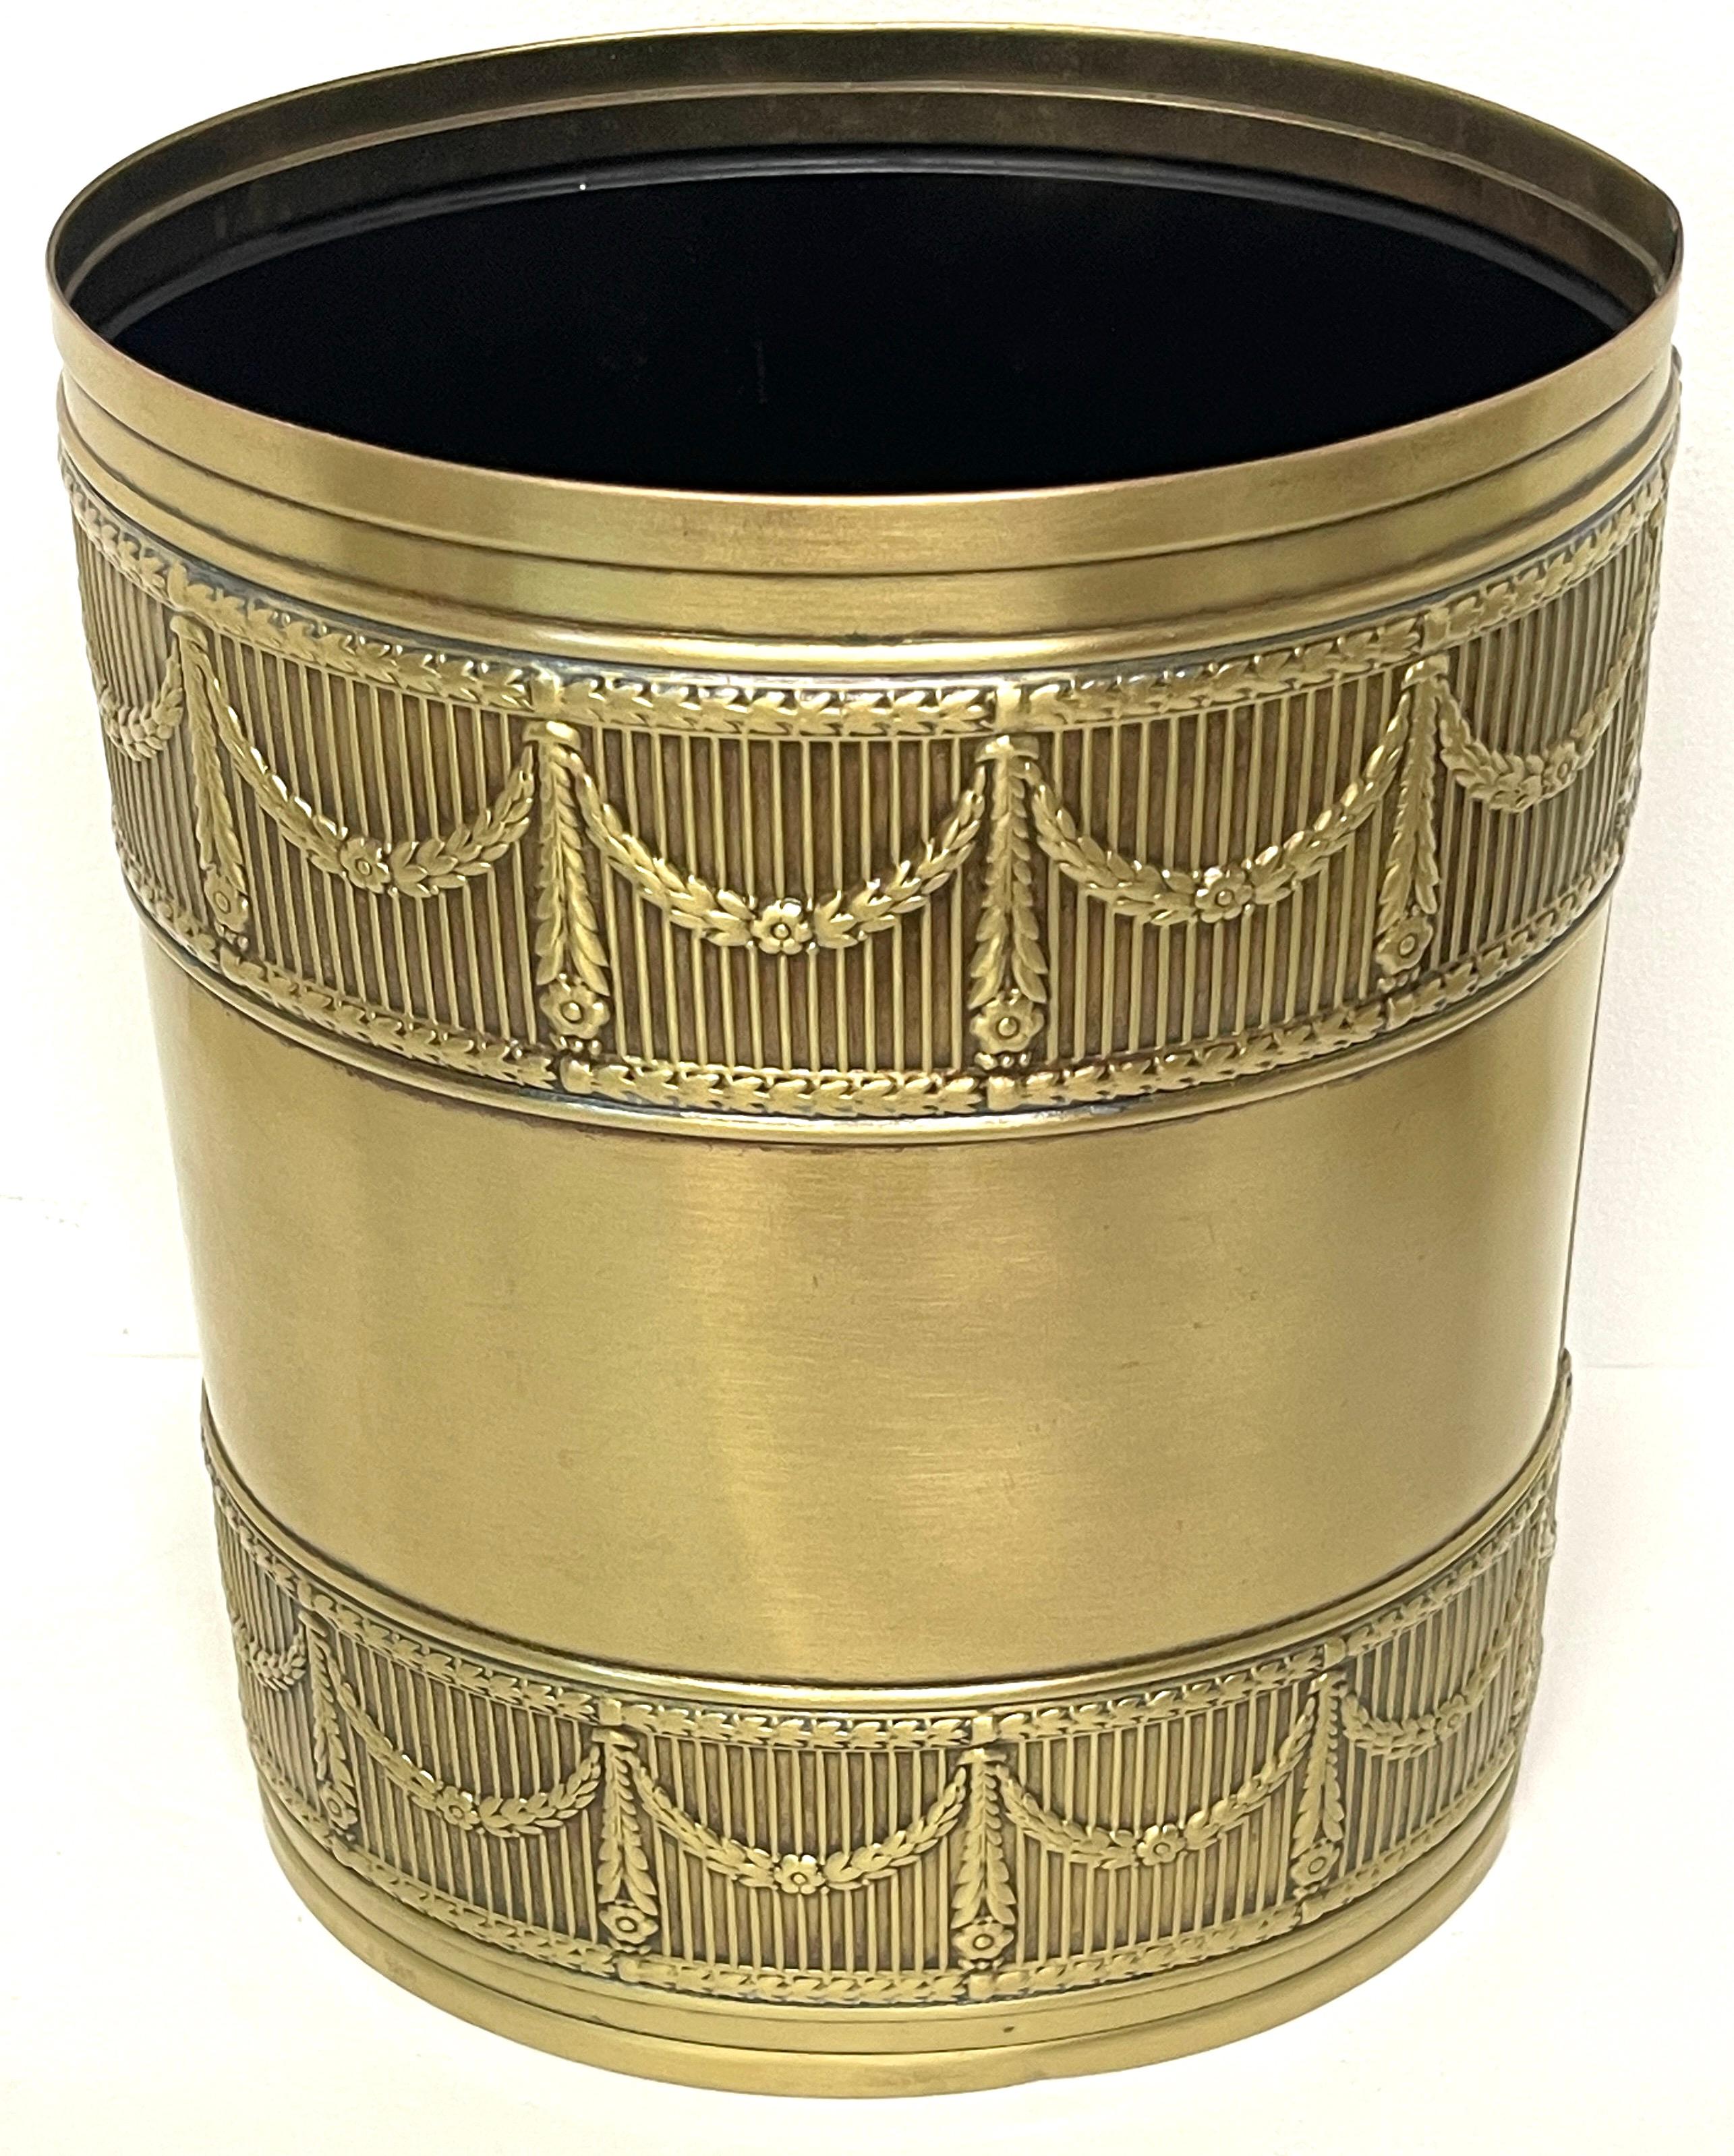 Austrian bronze & iron neoclassical trash can / wastepaper basket 
Austria, circa early 20th century
Of oval form with a continuous trellis, garland and flowerhead motif. Beautiful rich patina, cast and applied to a iron body. 

